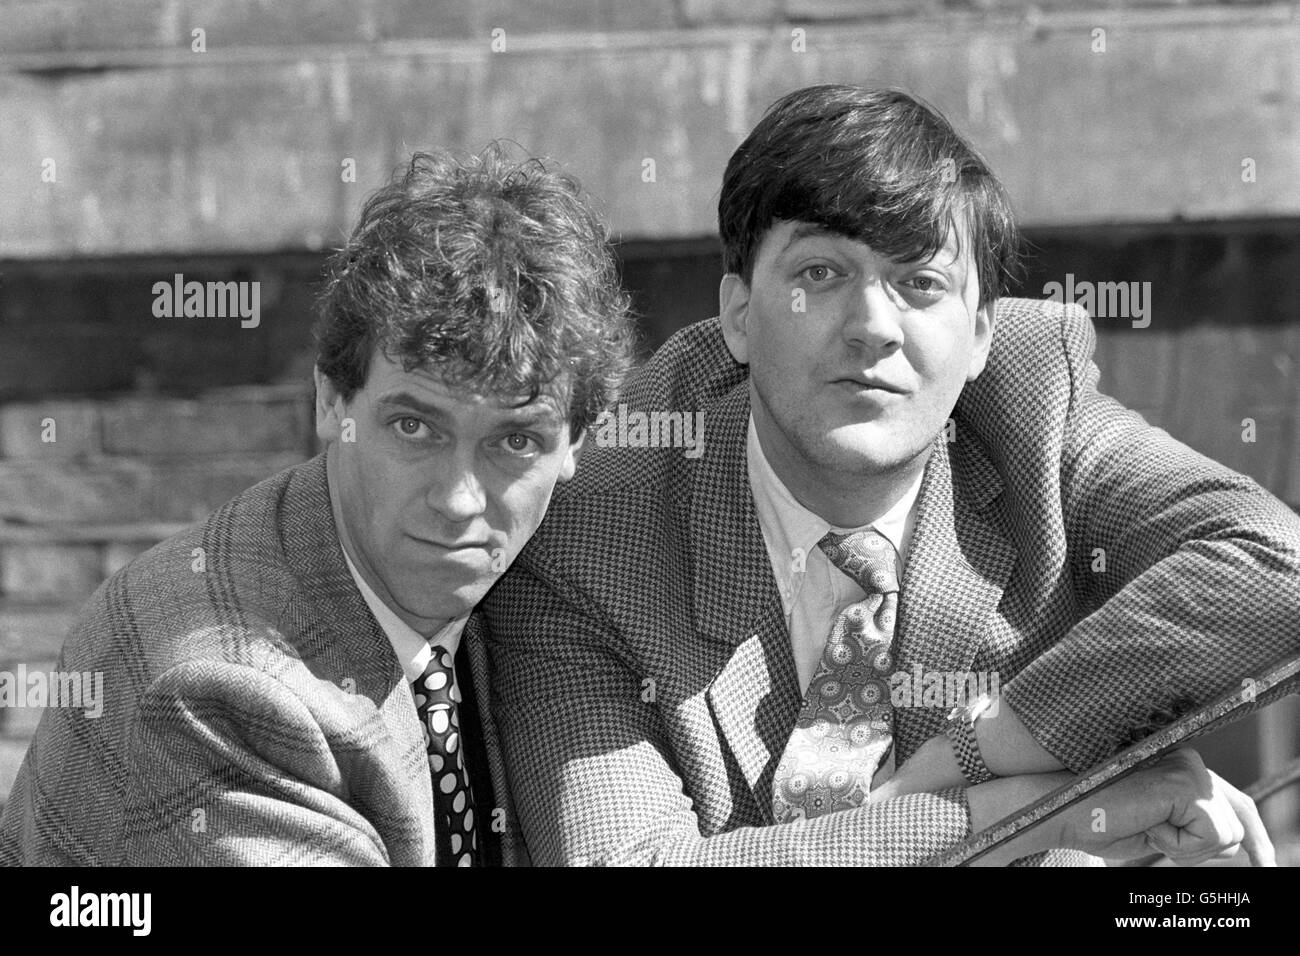 Entertainment - Comedians - Hugh Laurie and Stephen Fry Stock Photo